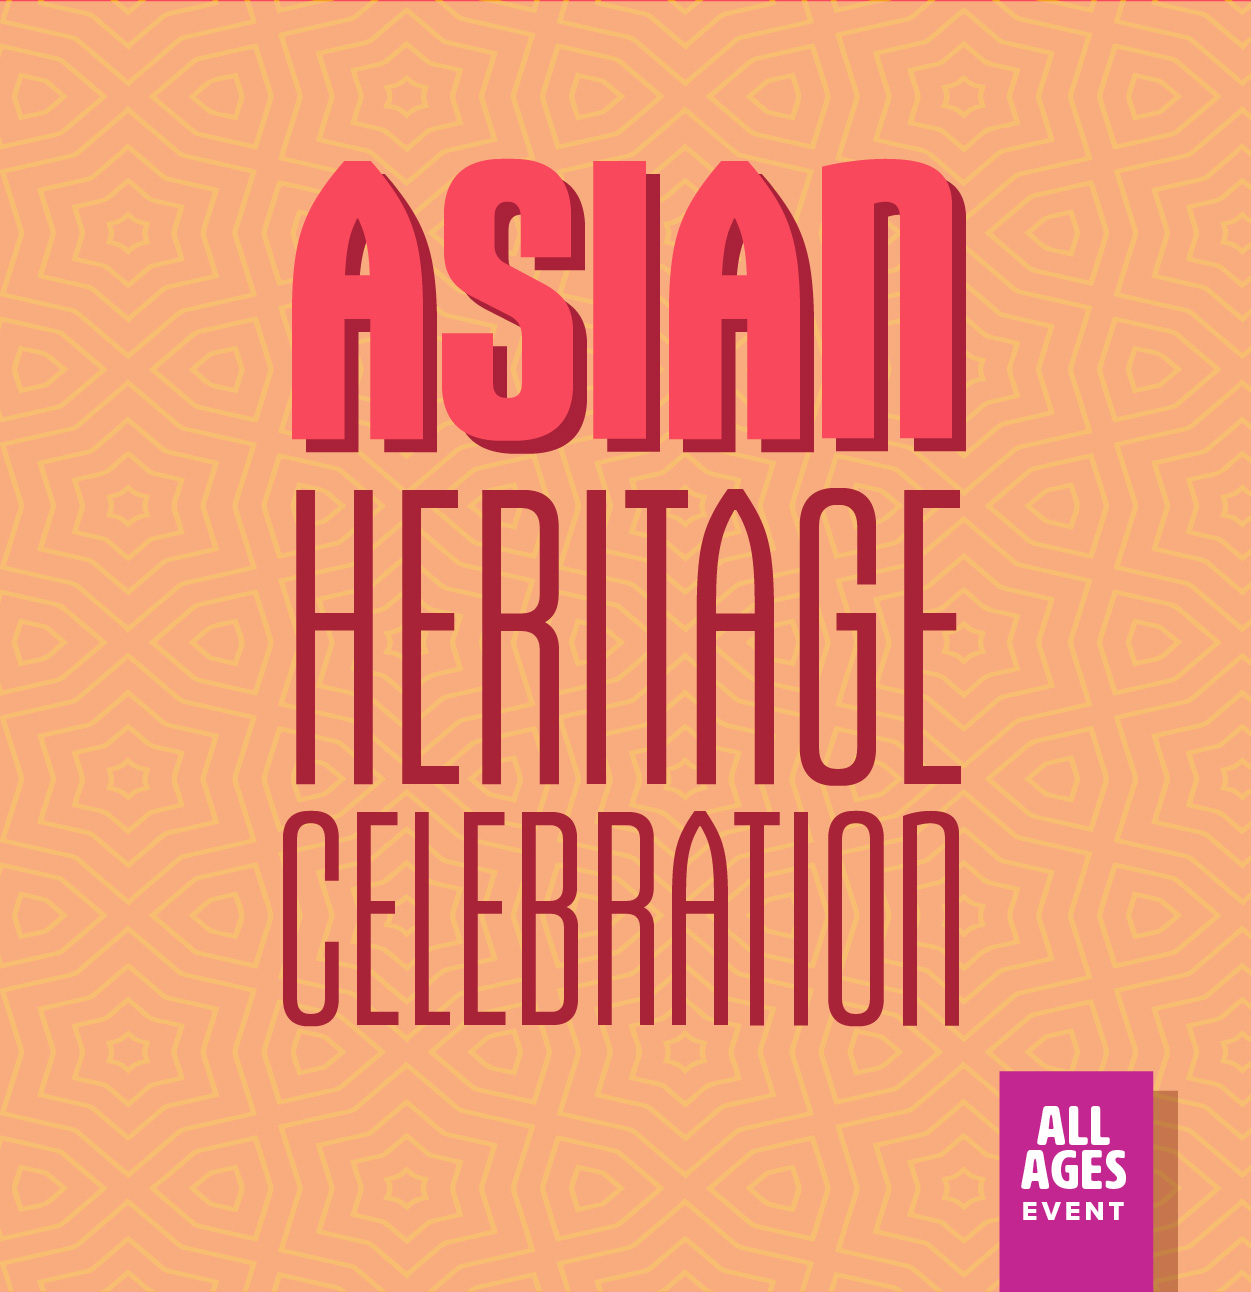 Asian Heritage Celebration all ages